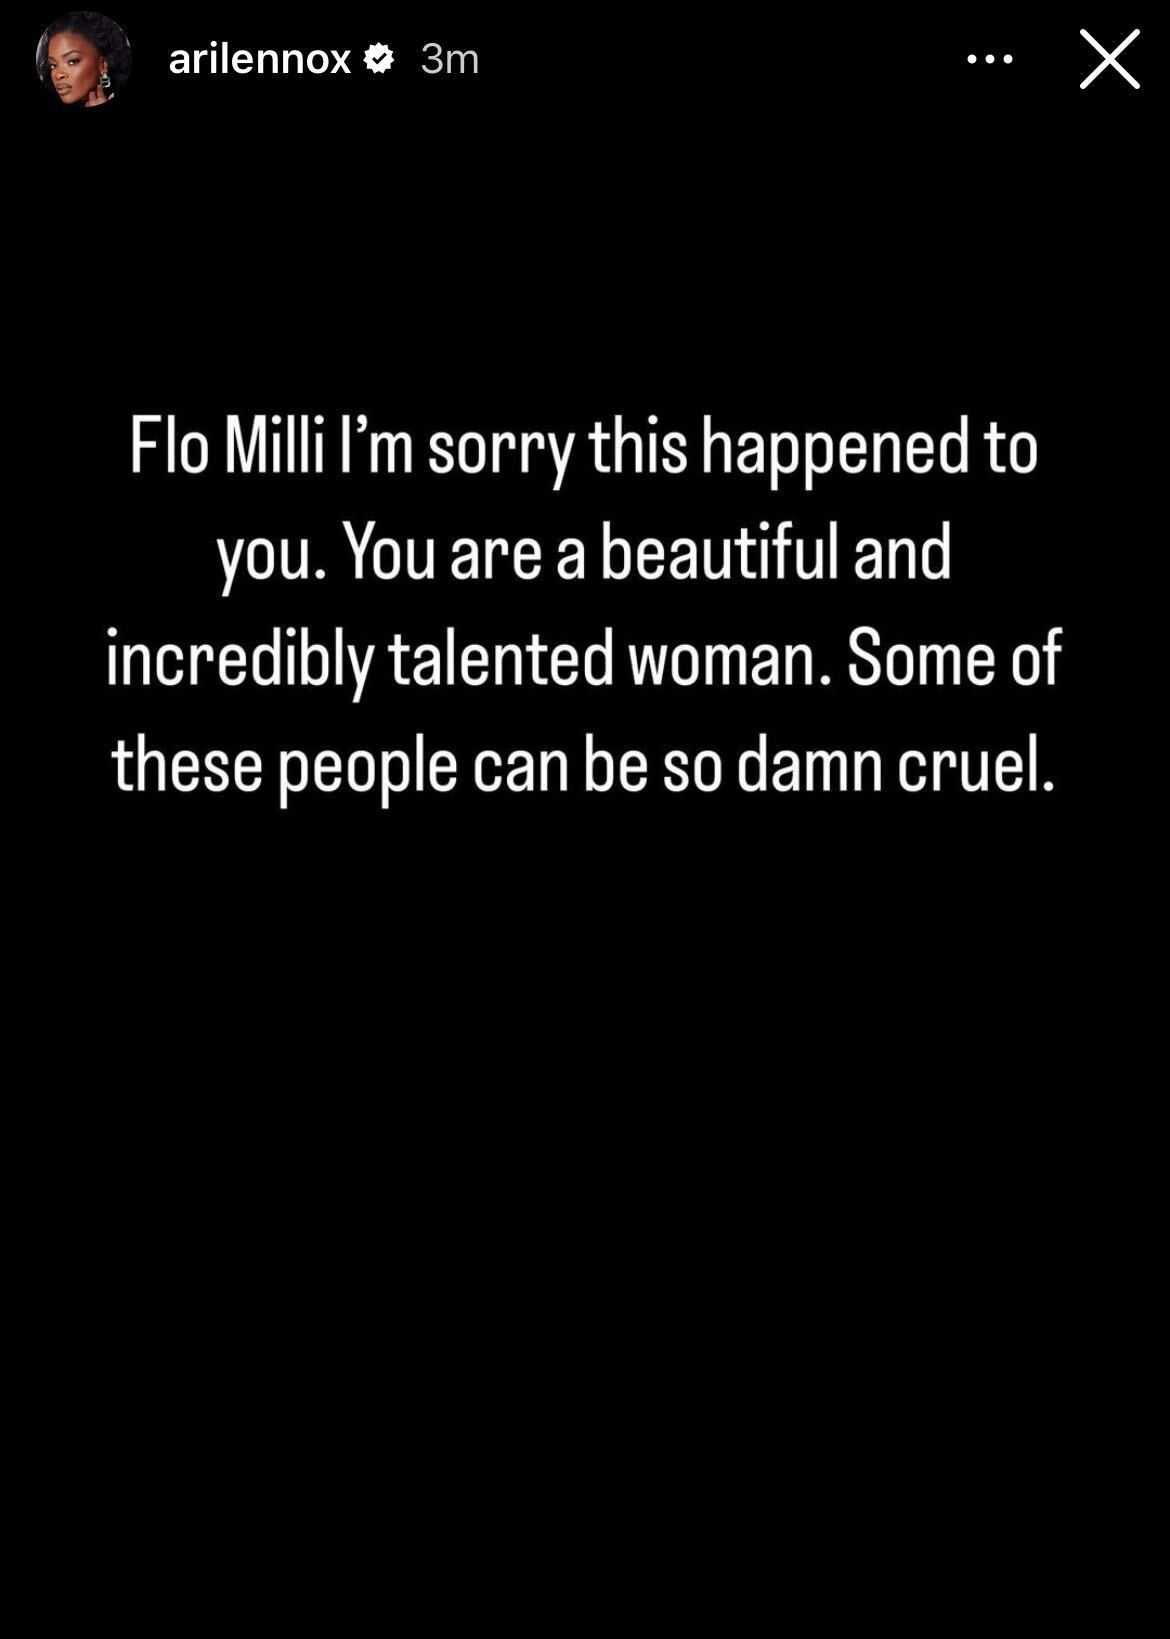 Ari Lennox&#x27;s Instagram post expressing sympathy to Flo Milli, acknowledging her talent and lamenting over cruelty faced